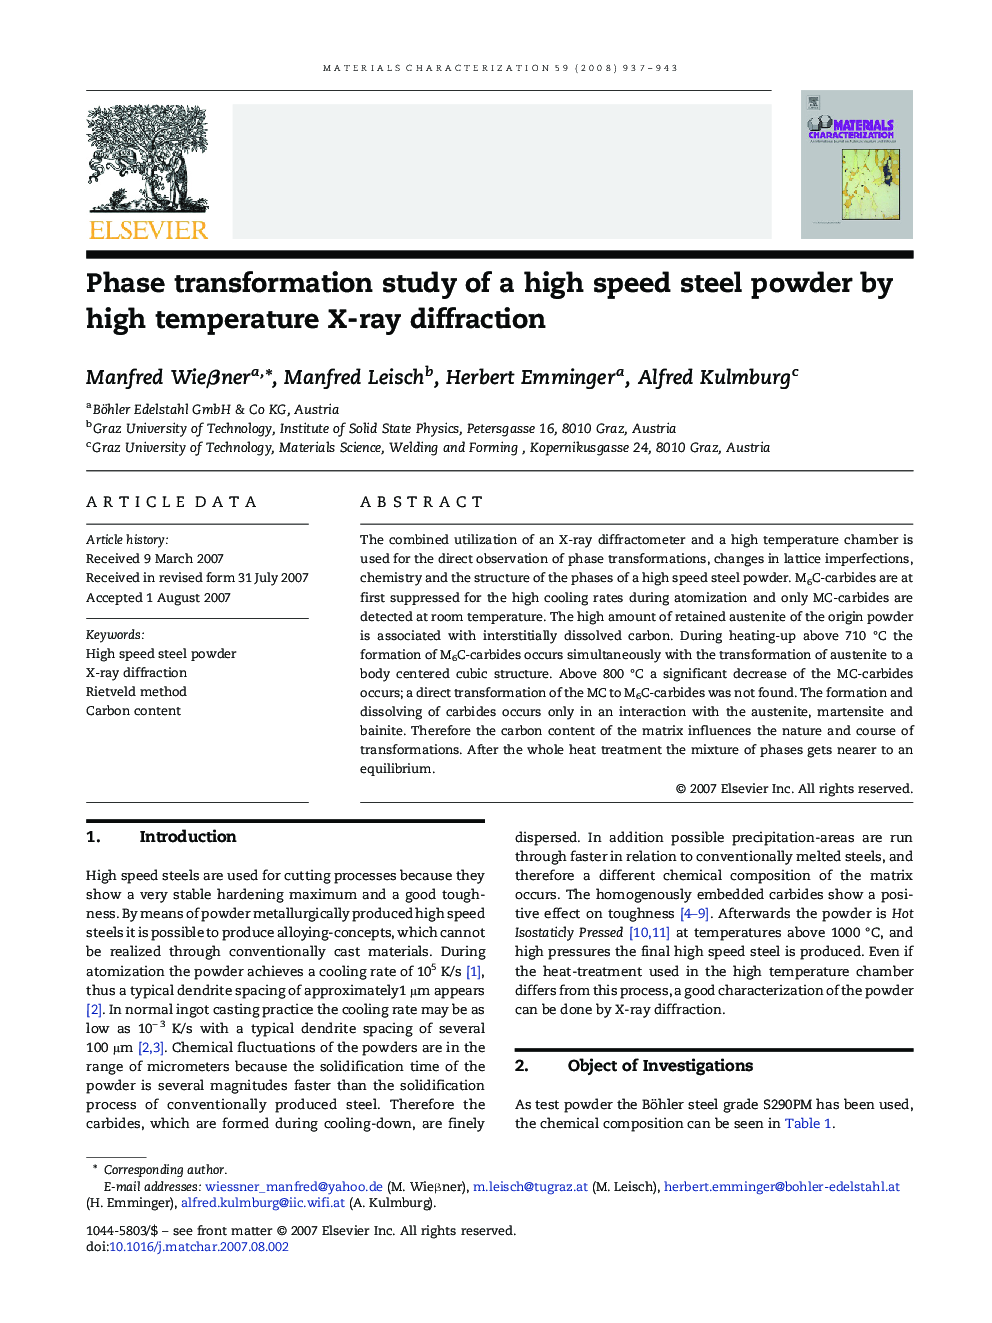 Phase transformation study of a high speed steel powder by high temperature X-ray diffraction